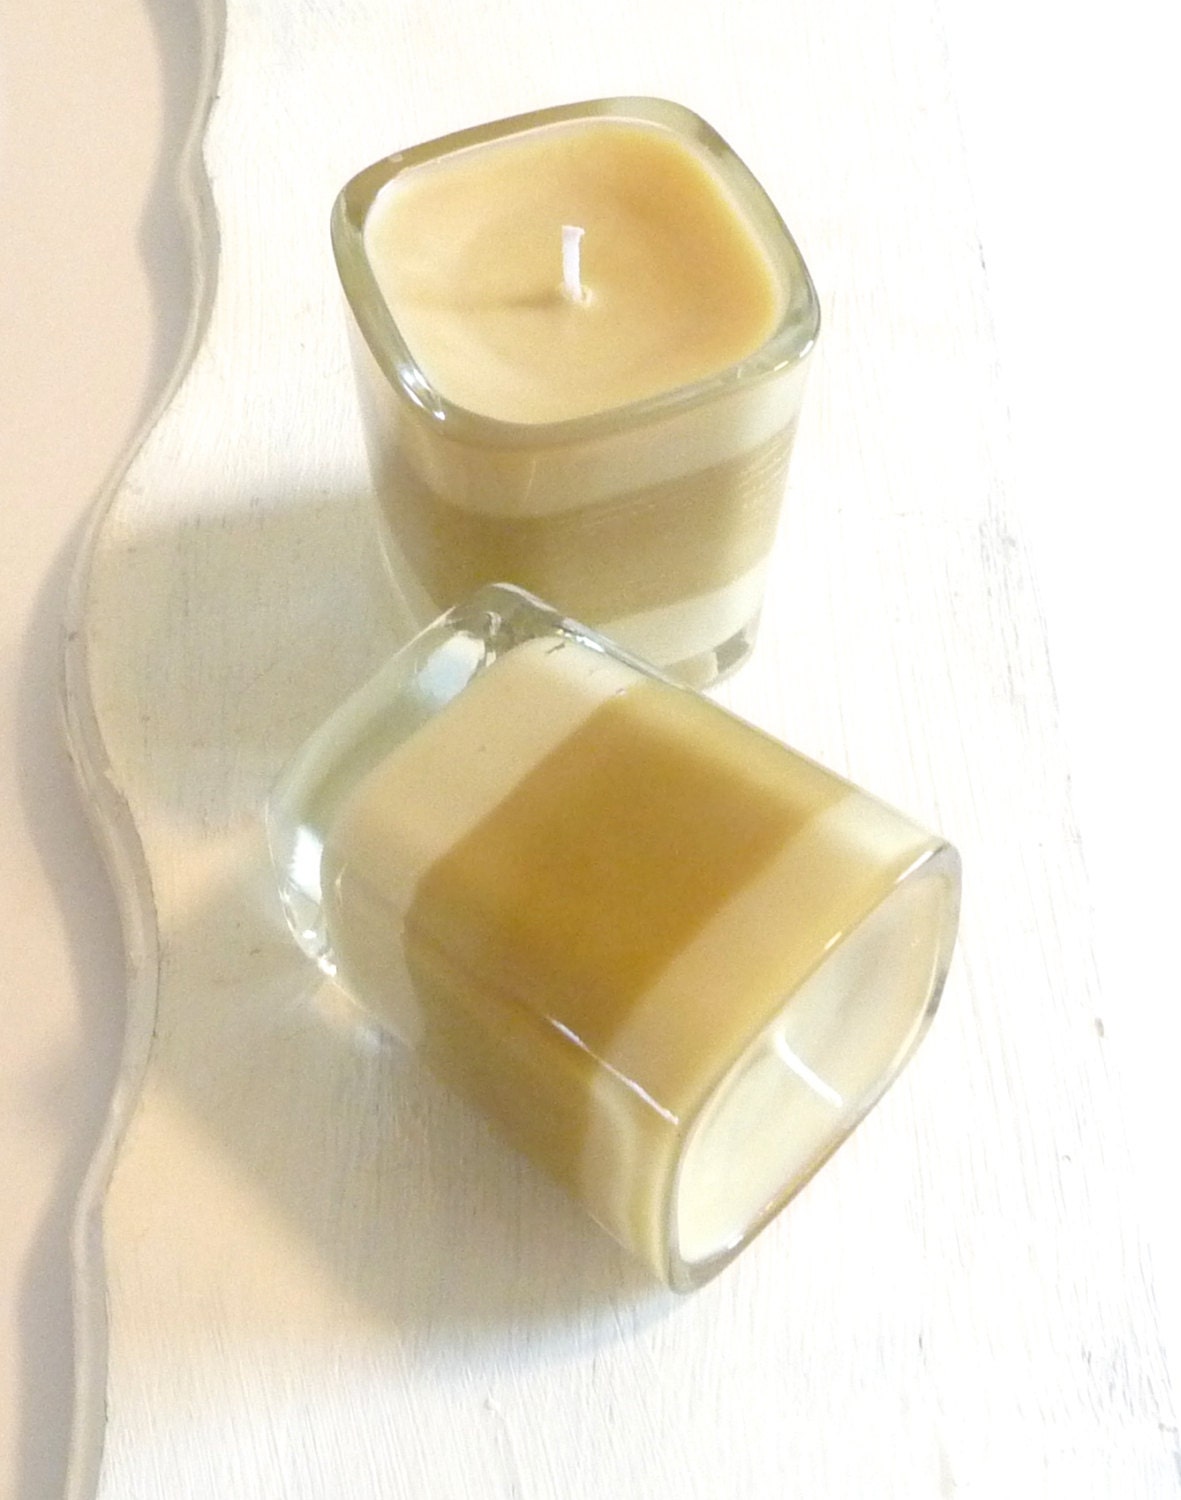 Cafe Mocha Layered Soy Candle in 2 oz Glass Jar, Brown and Beige Candle, Coffee Scented Candle